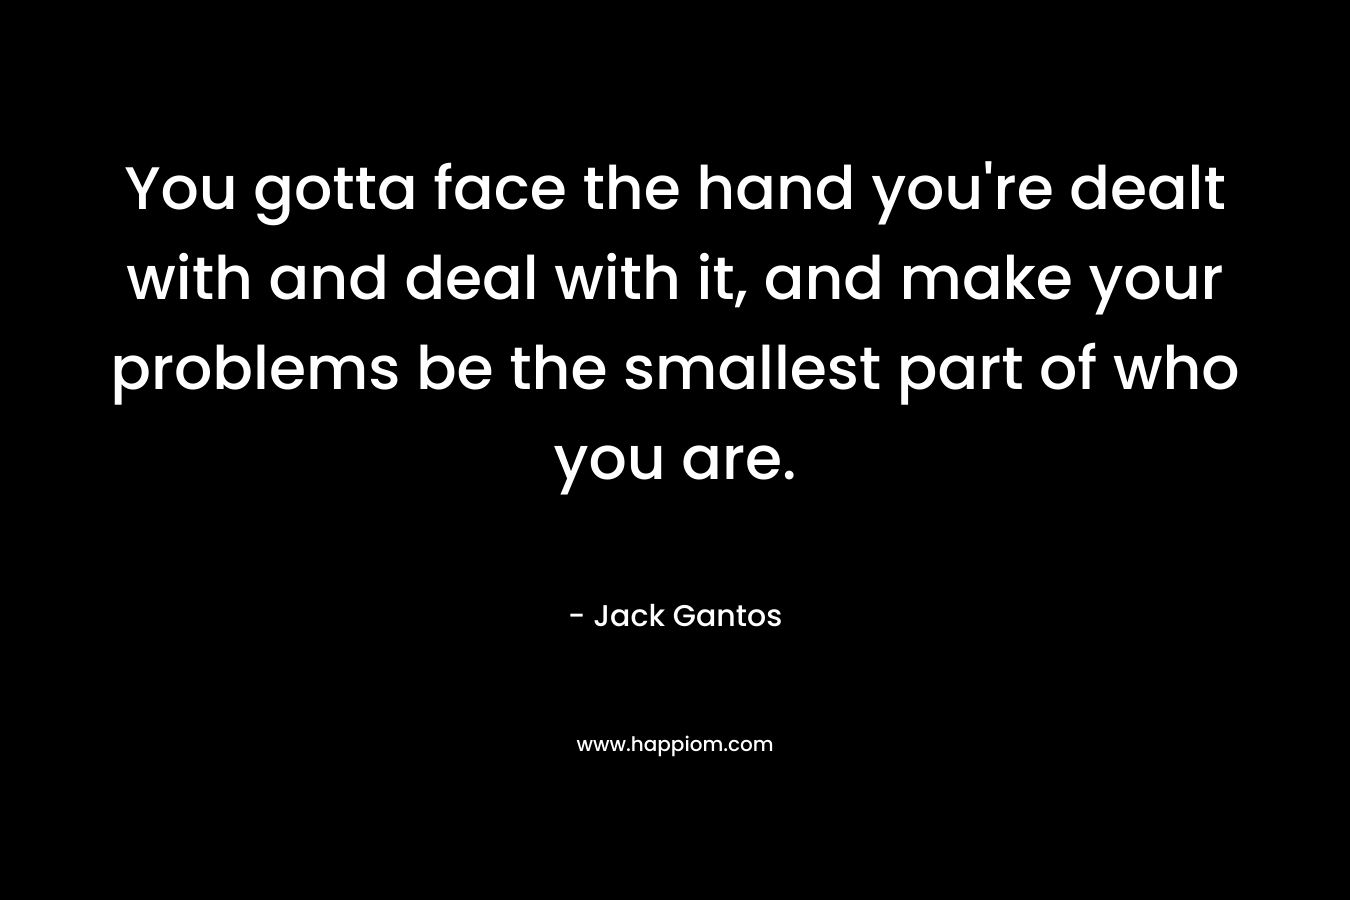 You gotta face the hand you’re dealt with and deal with it, and make your problems be the smallest part of who you are. – Jack Gantos